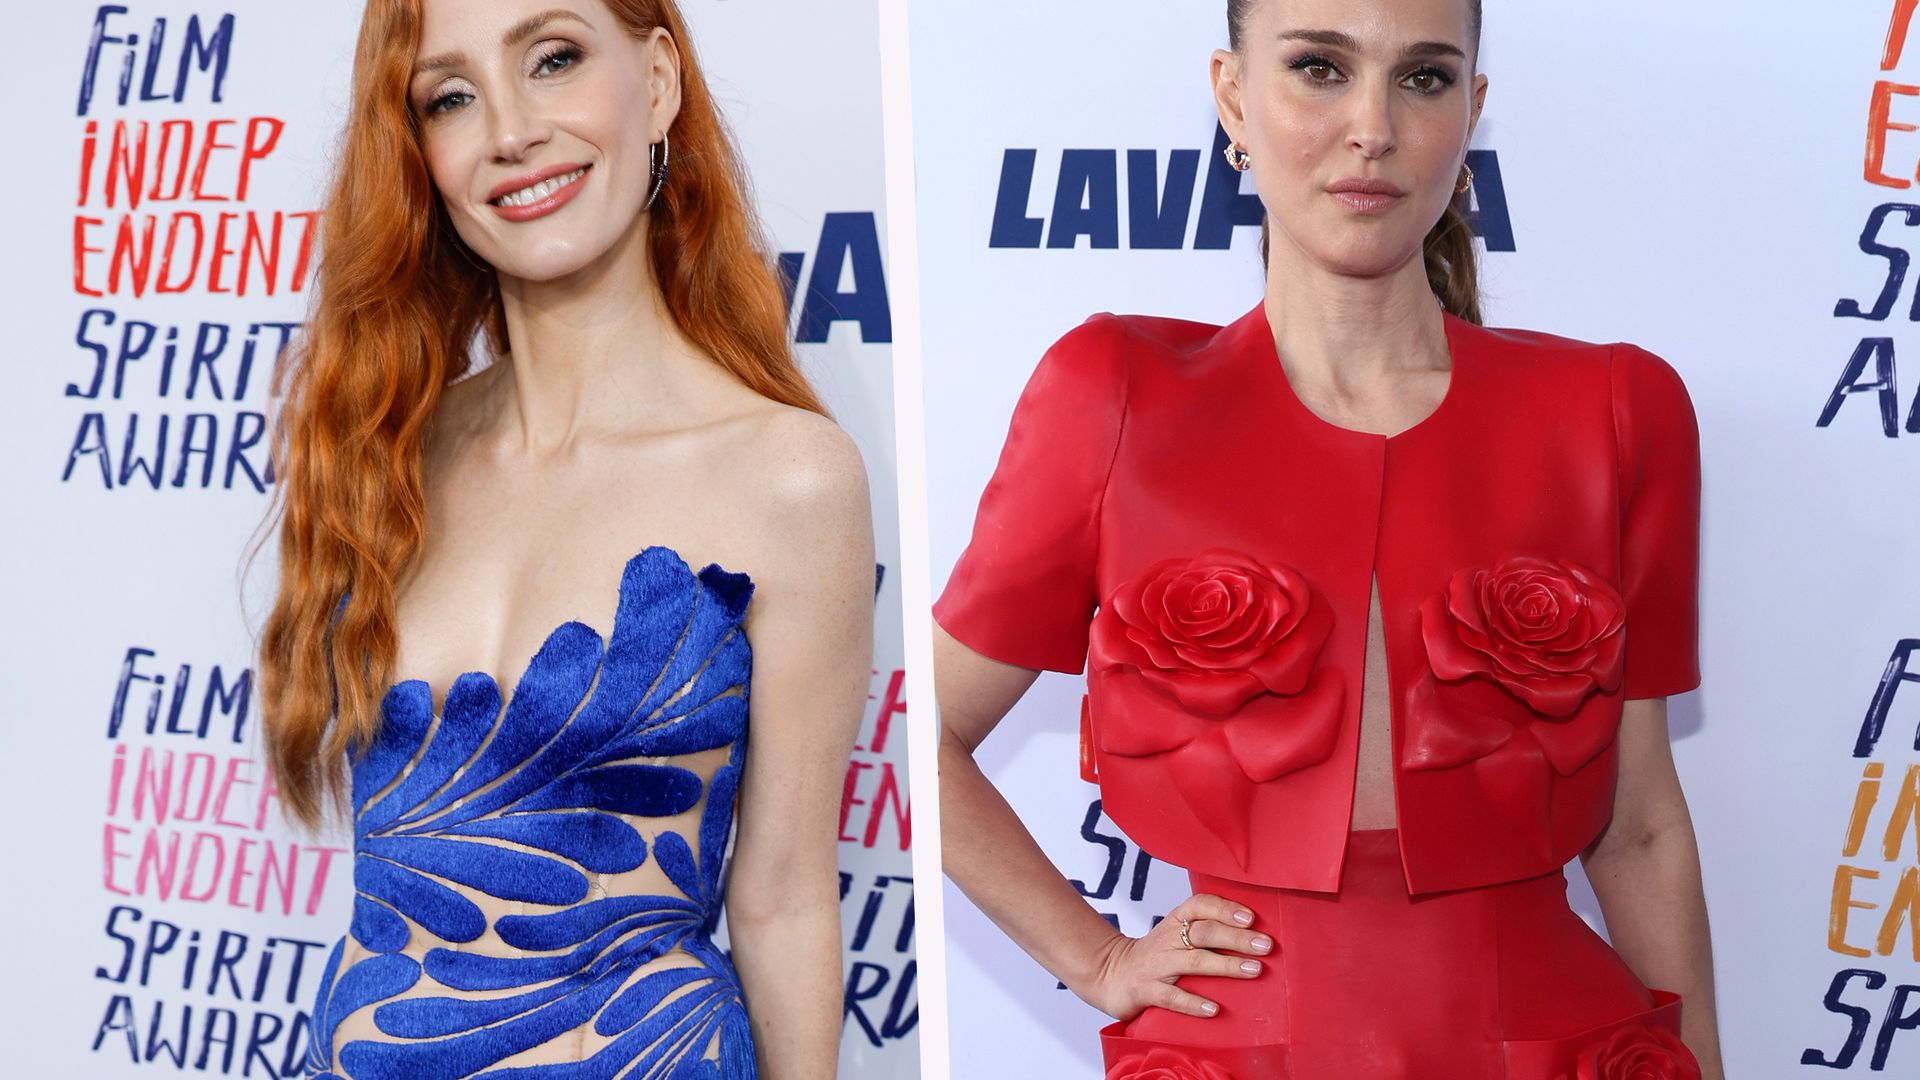 Film Independent Spirit Awards 2024: Jessica Chastain and Natalie Portman lead the best dressed in daring outfits